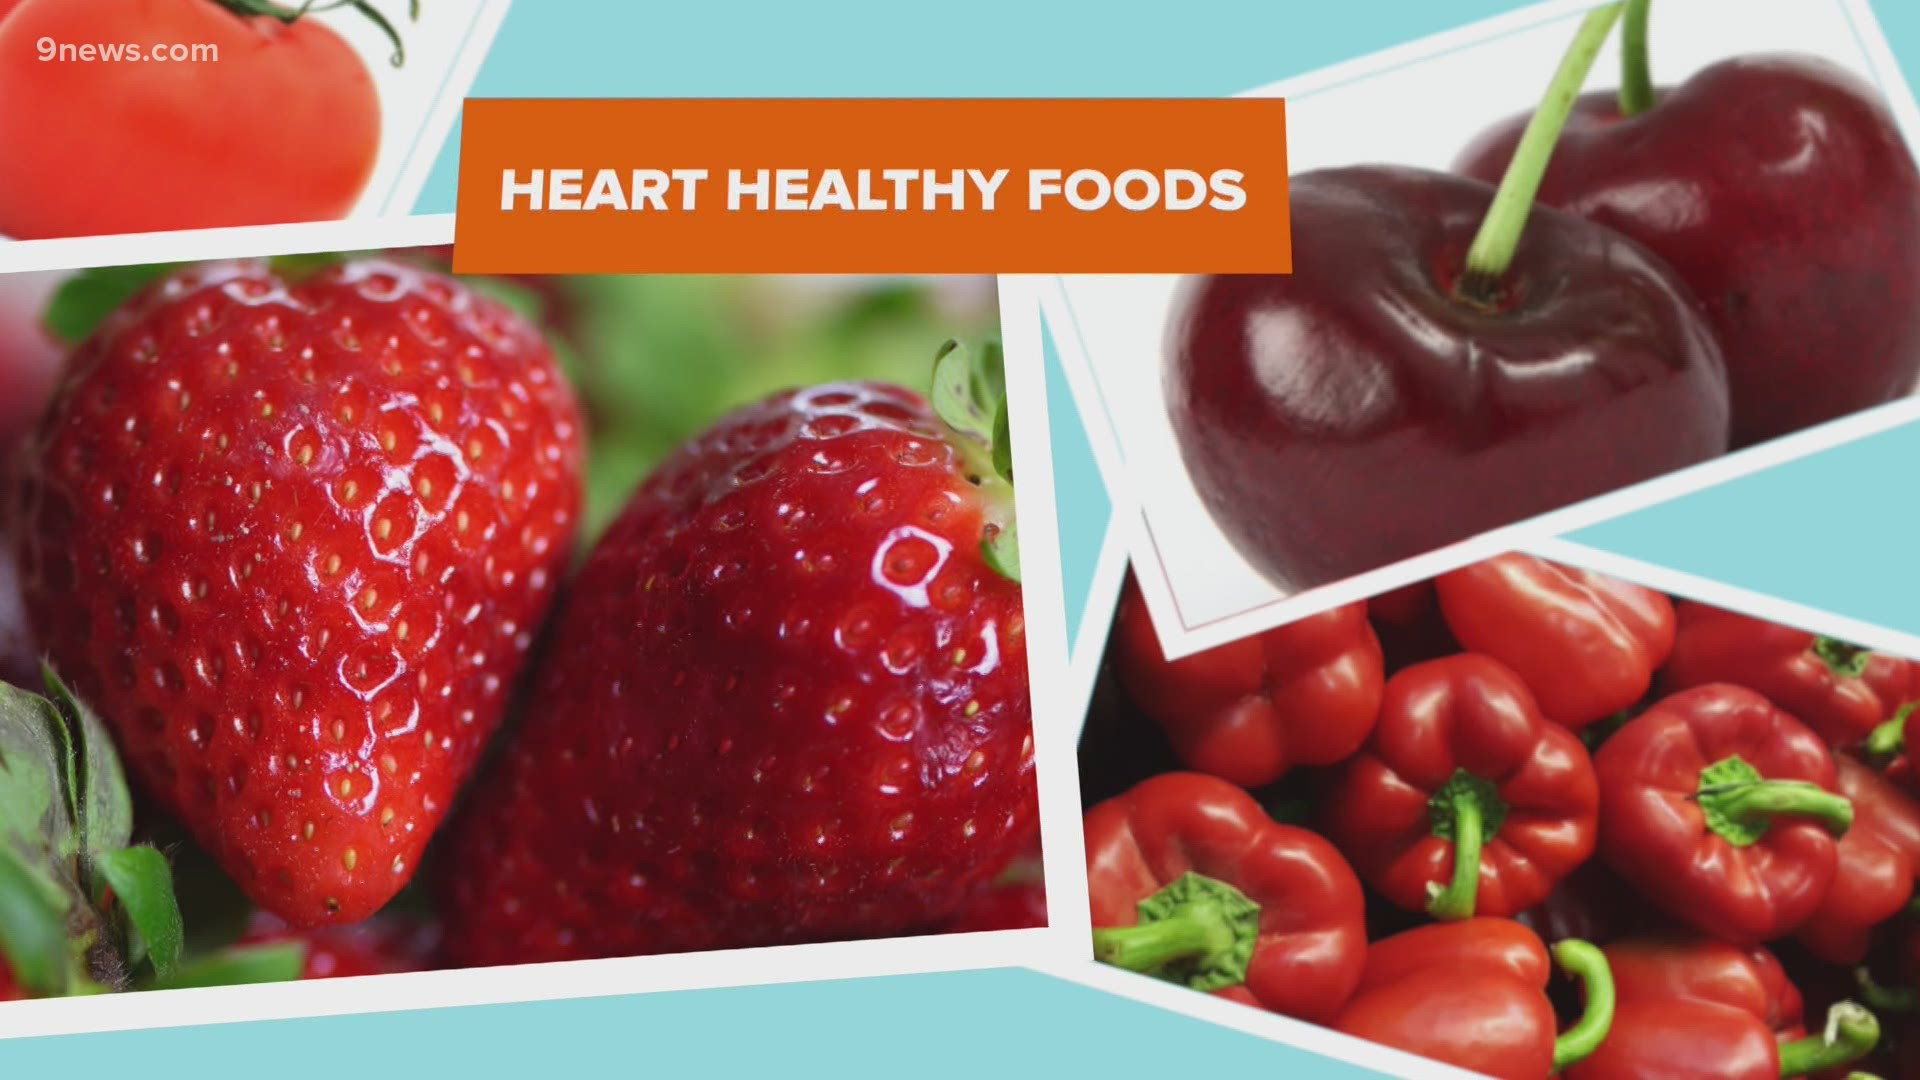 9NEWS nutritionist Regina Topelson shares some red-colored foods to incorporate into your diet for better heart health.